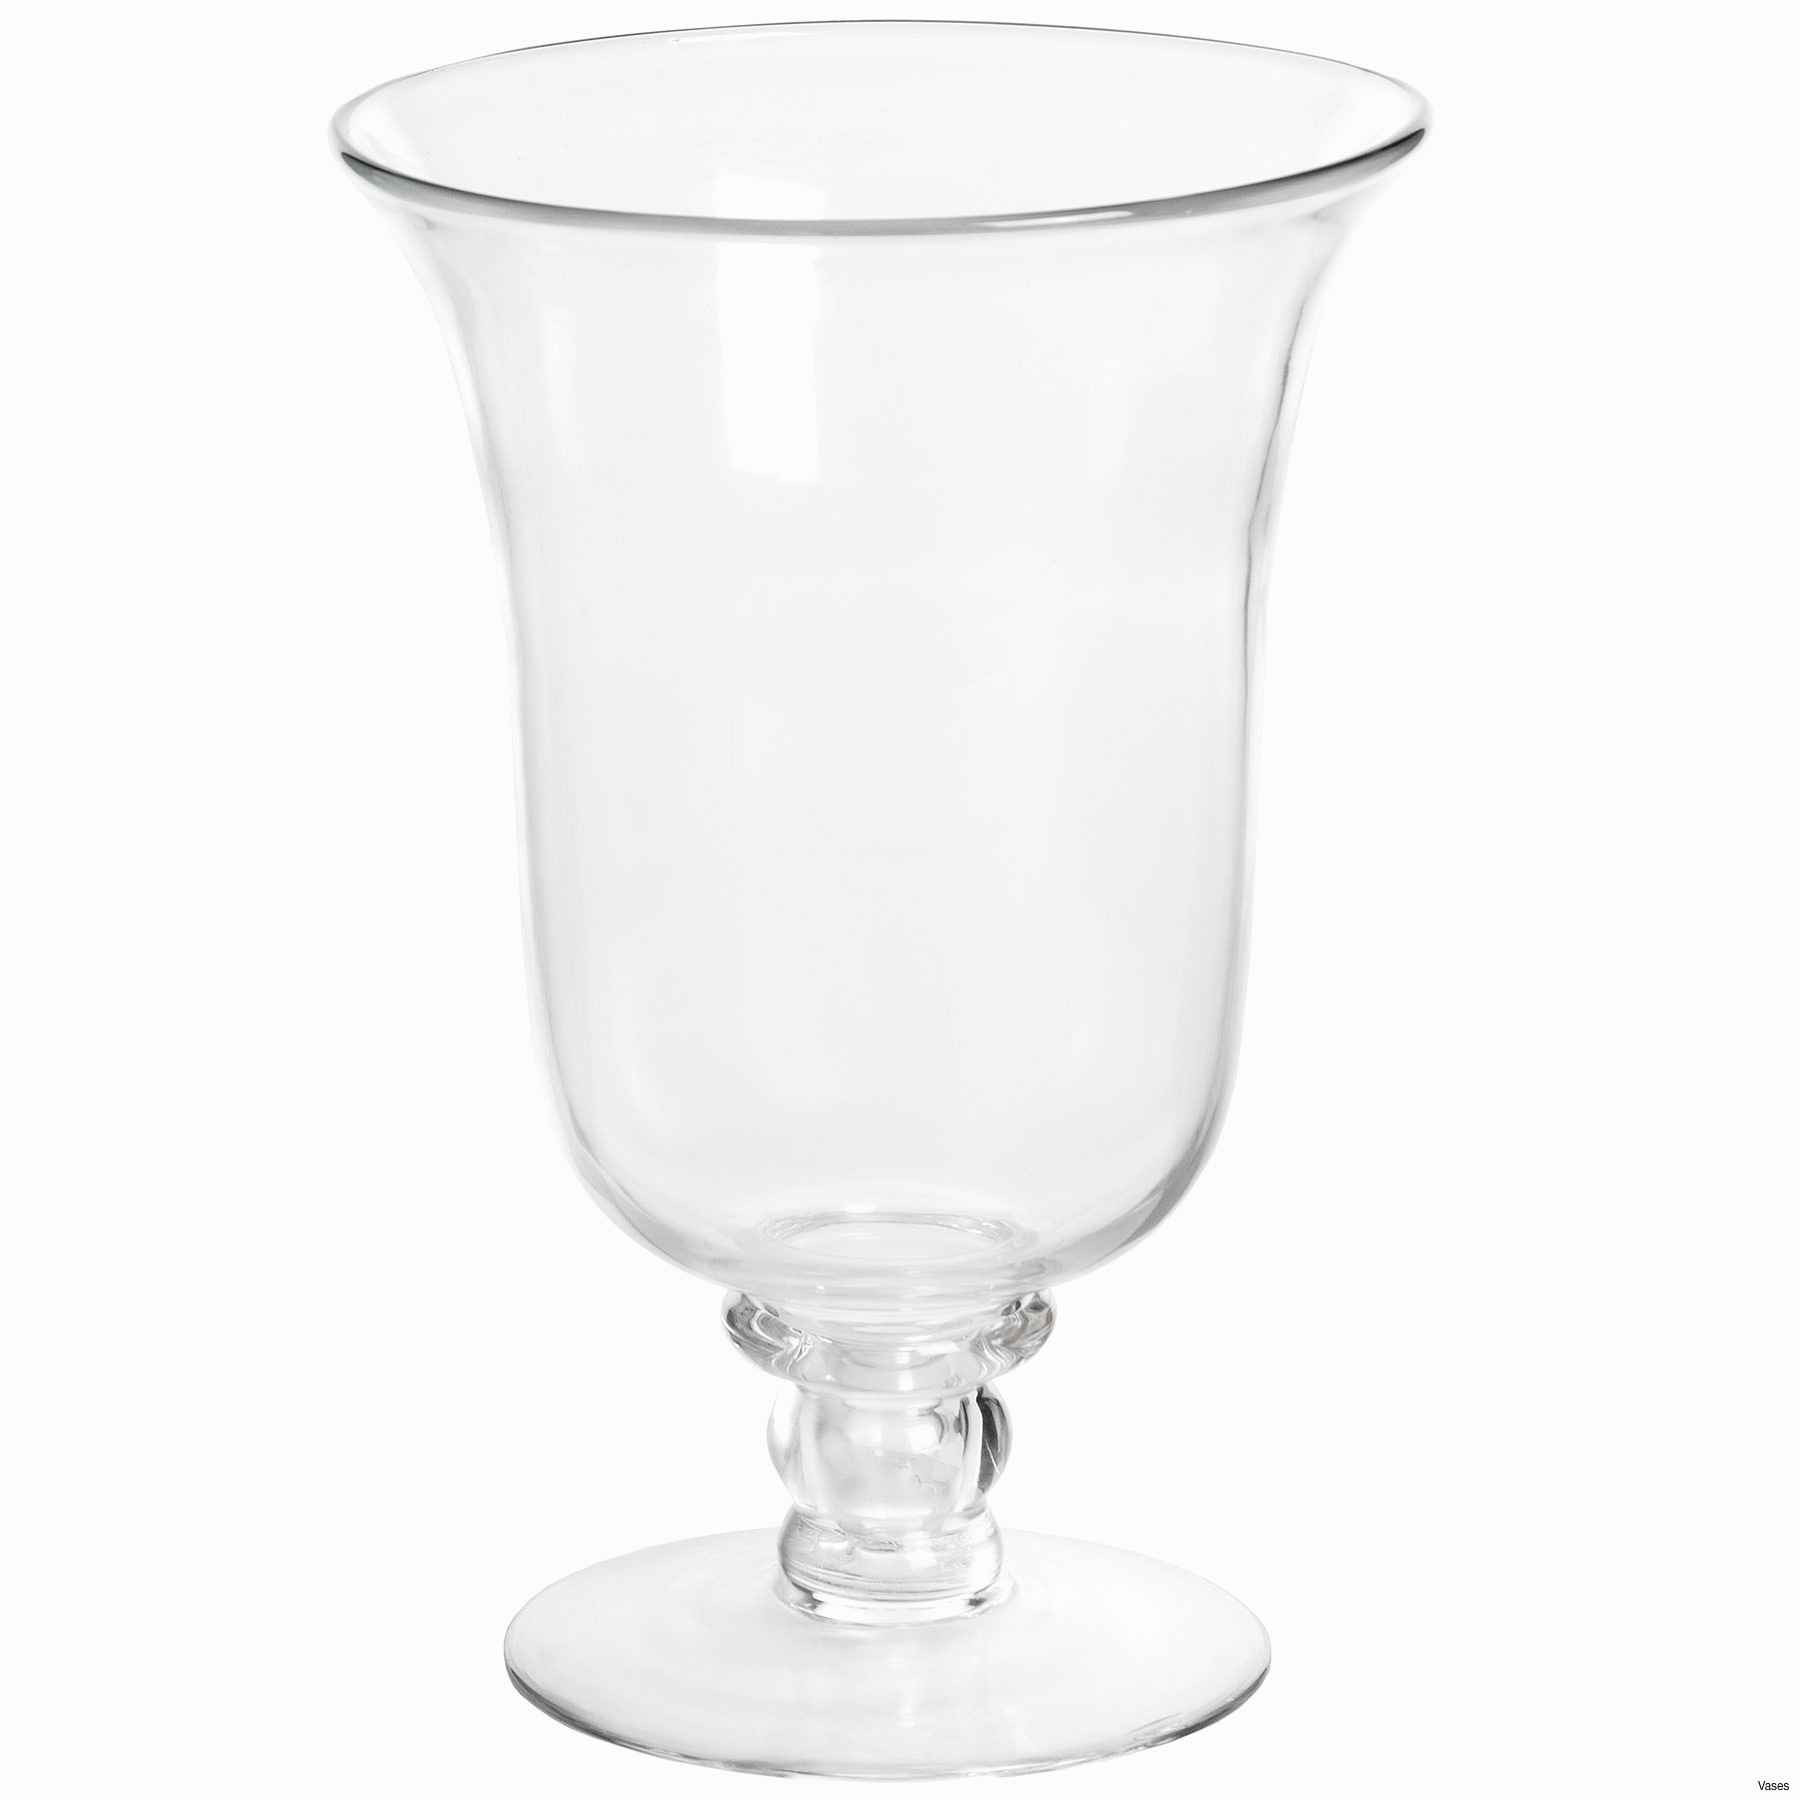 21 Great Clear Vases Bulk 2024 free download clear vases bulk of candle stands wholesale lovely faux crystal candle holders alive within candle stands wholesale lovely faux crystal candle holders alive vases gold tall jpgi 0d cheap in